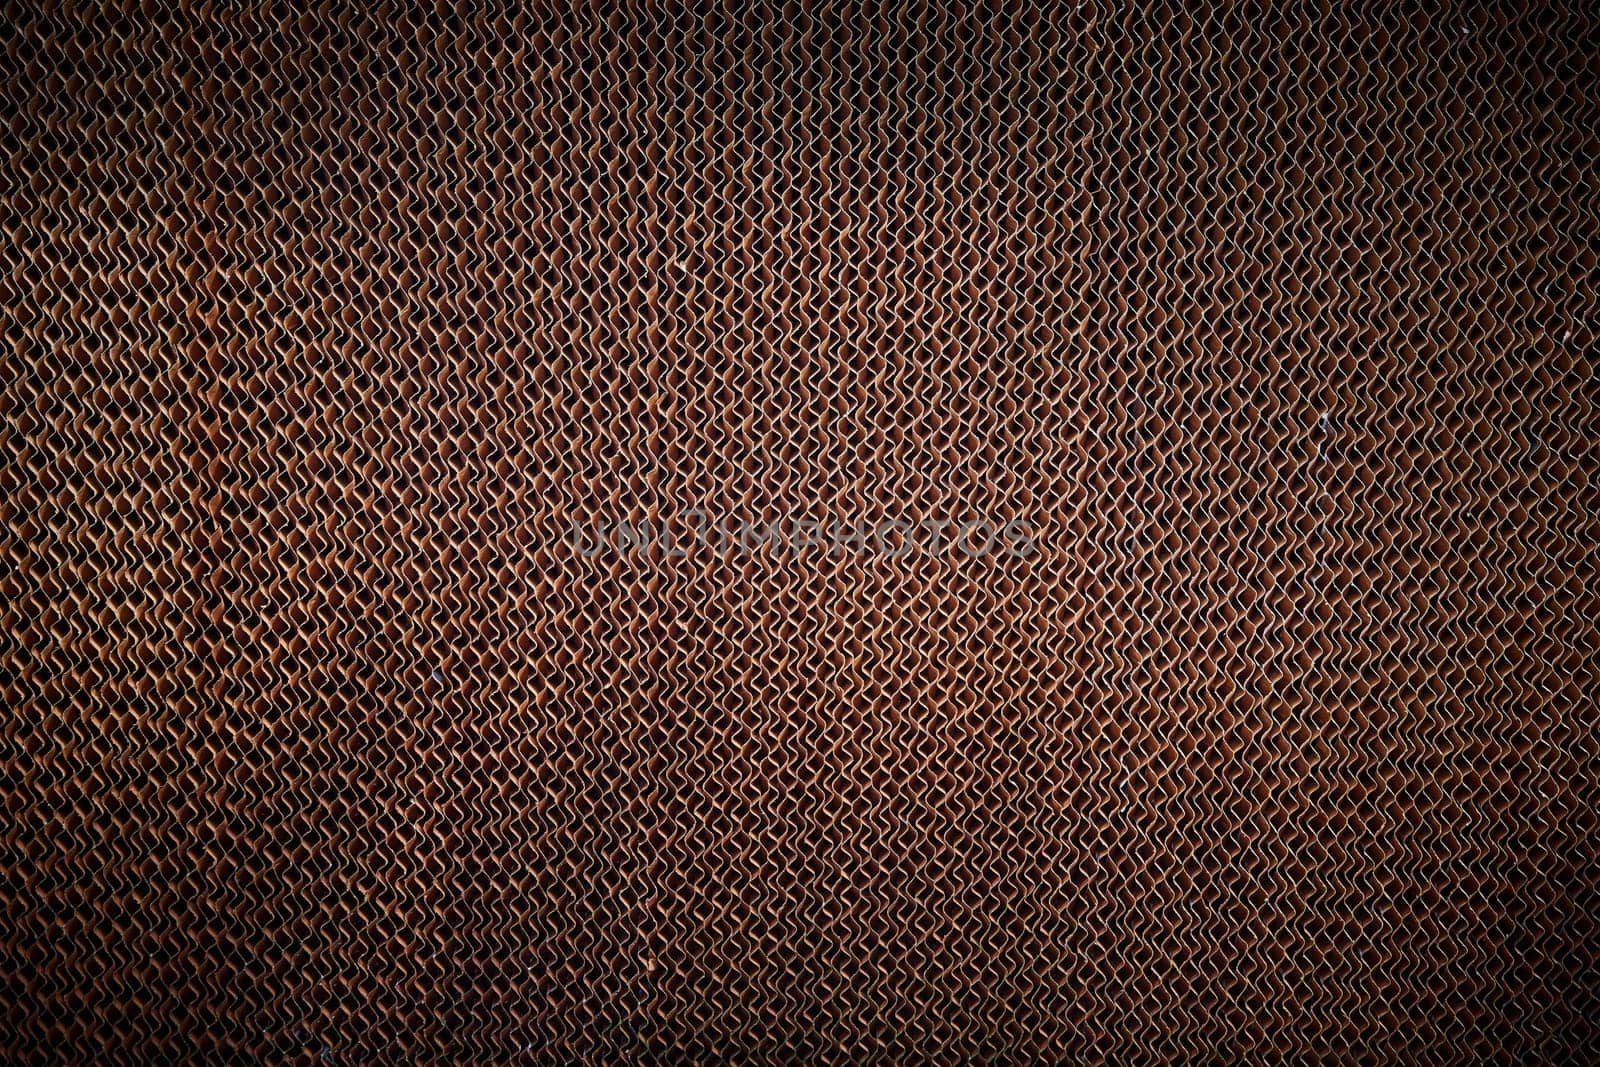 Coppery Diamond Patterned Metal Mesh Texture for Industrial Design, Shot in Muncie Conservatory Gardens, Indiana